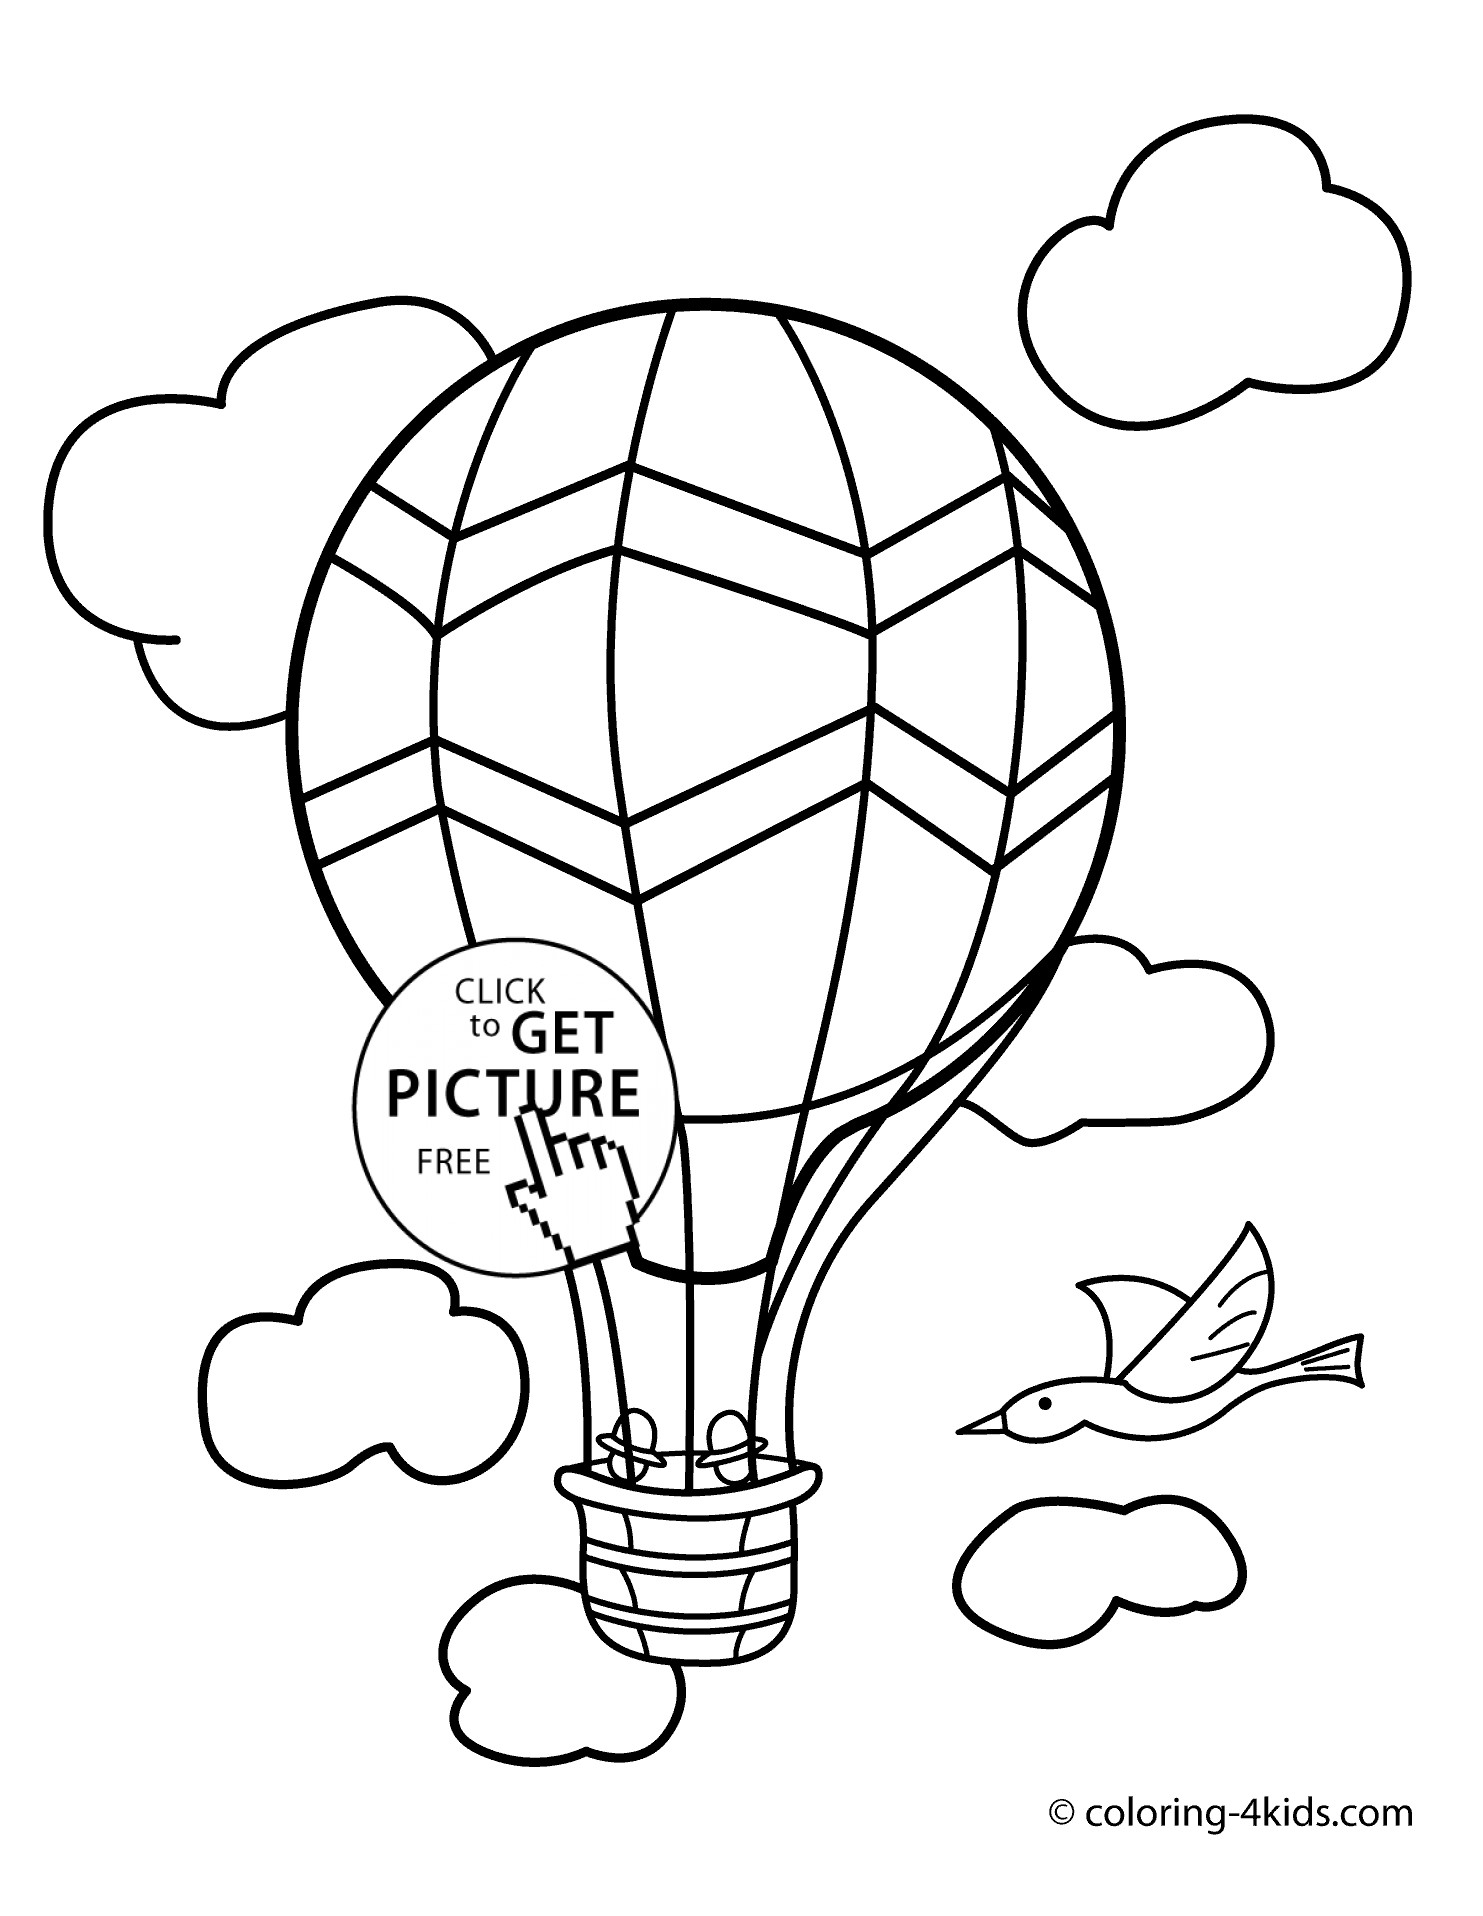 Transportation Coloring Pages For Toddlers
 Balloon transportation coloring pages aerostat for kids